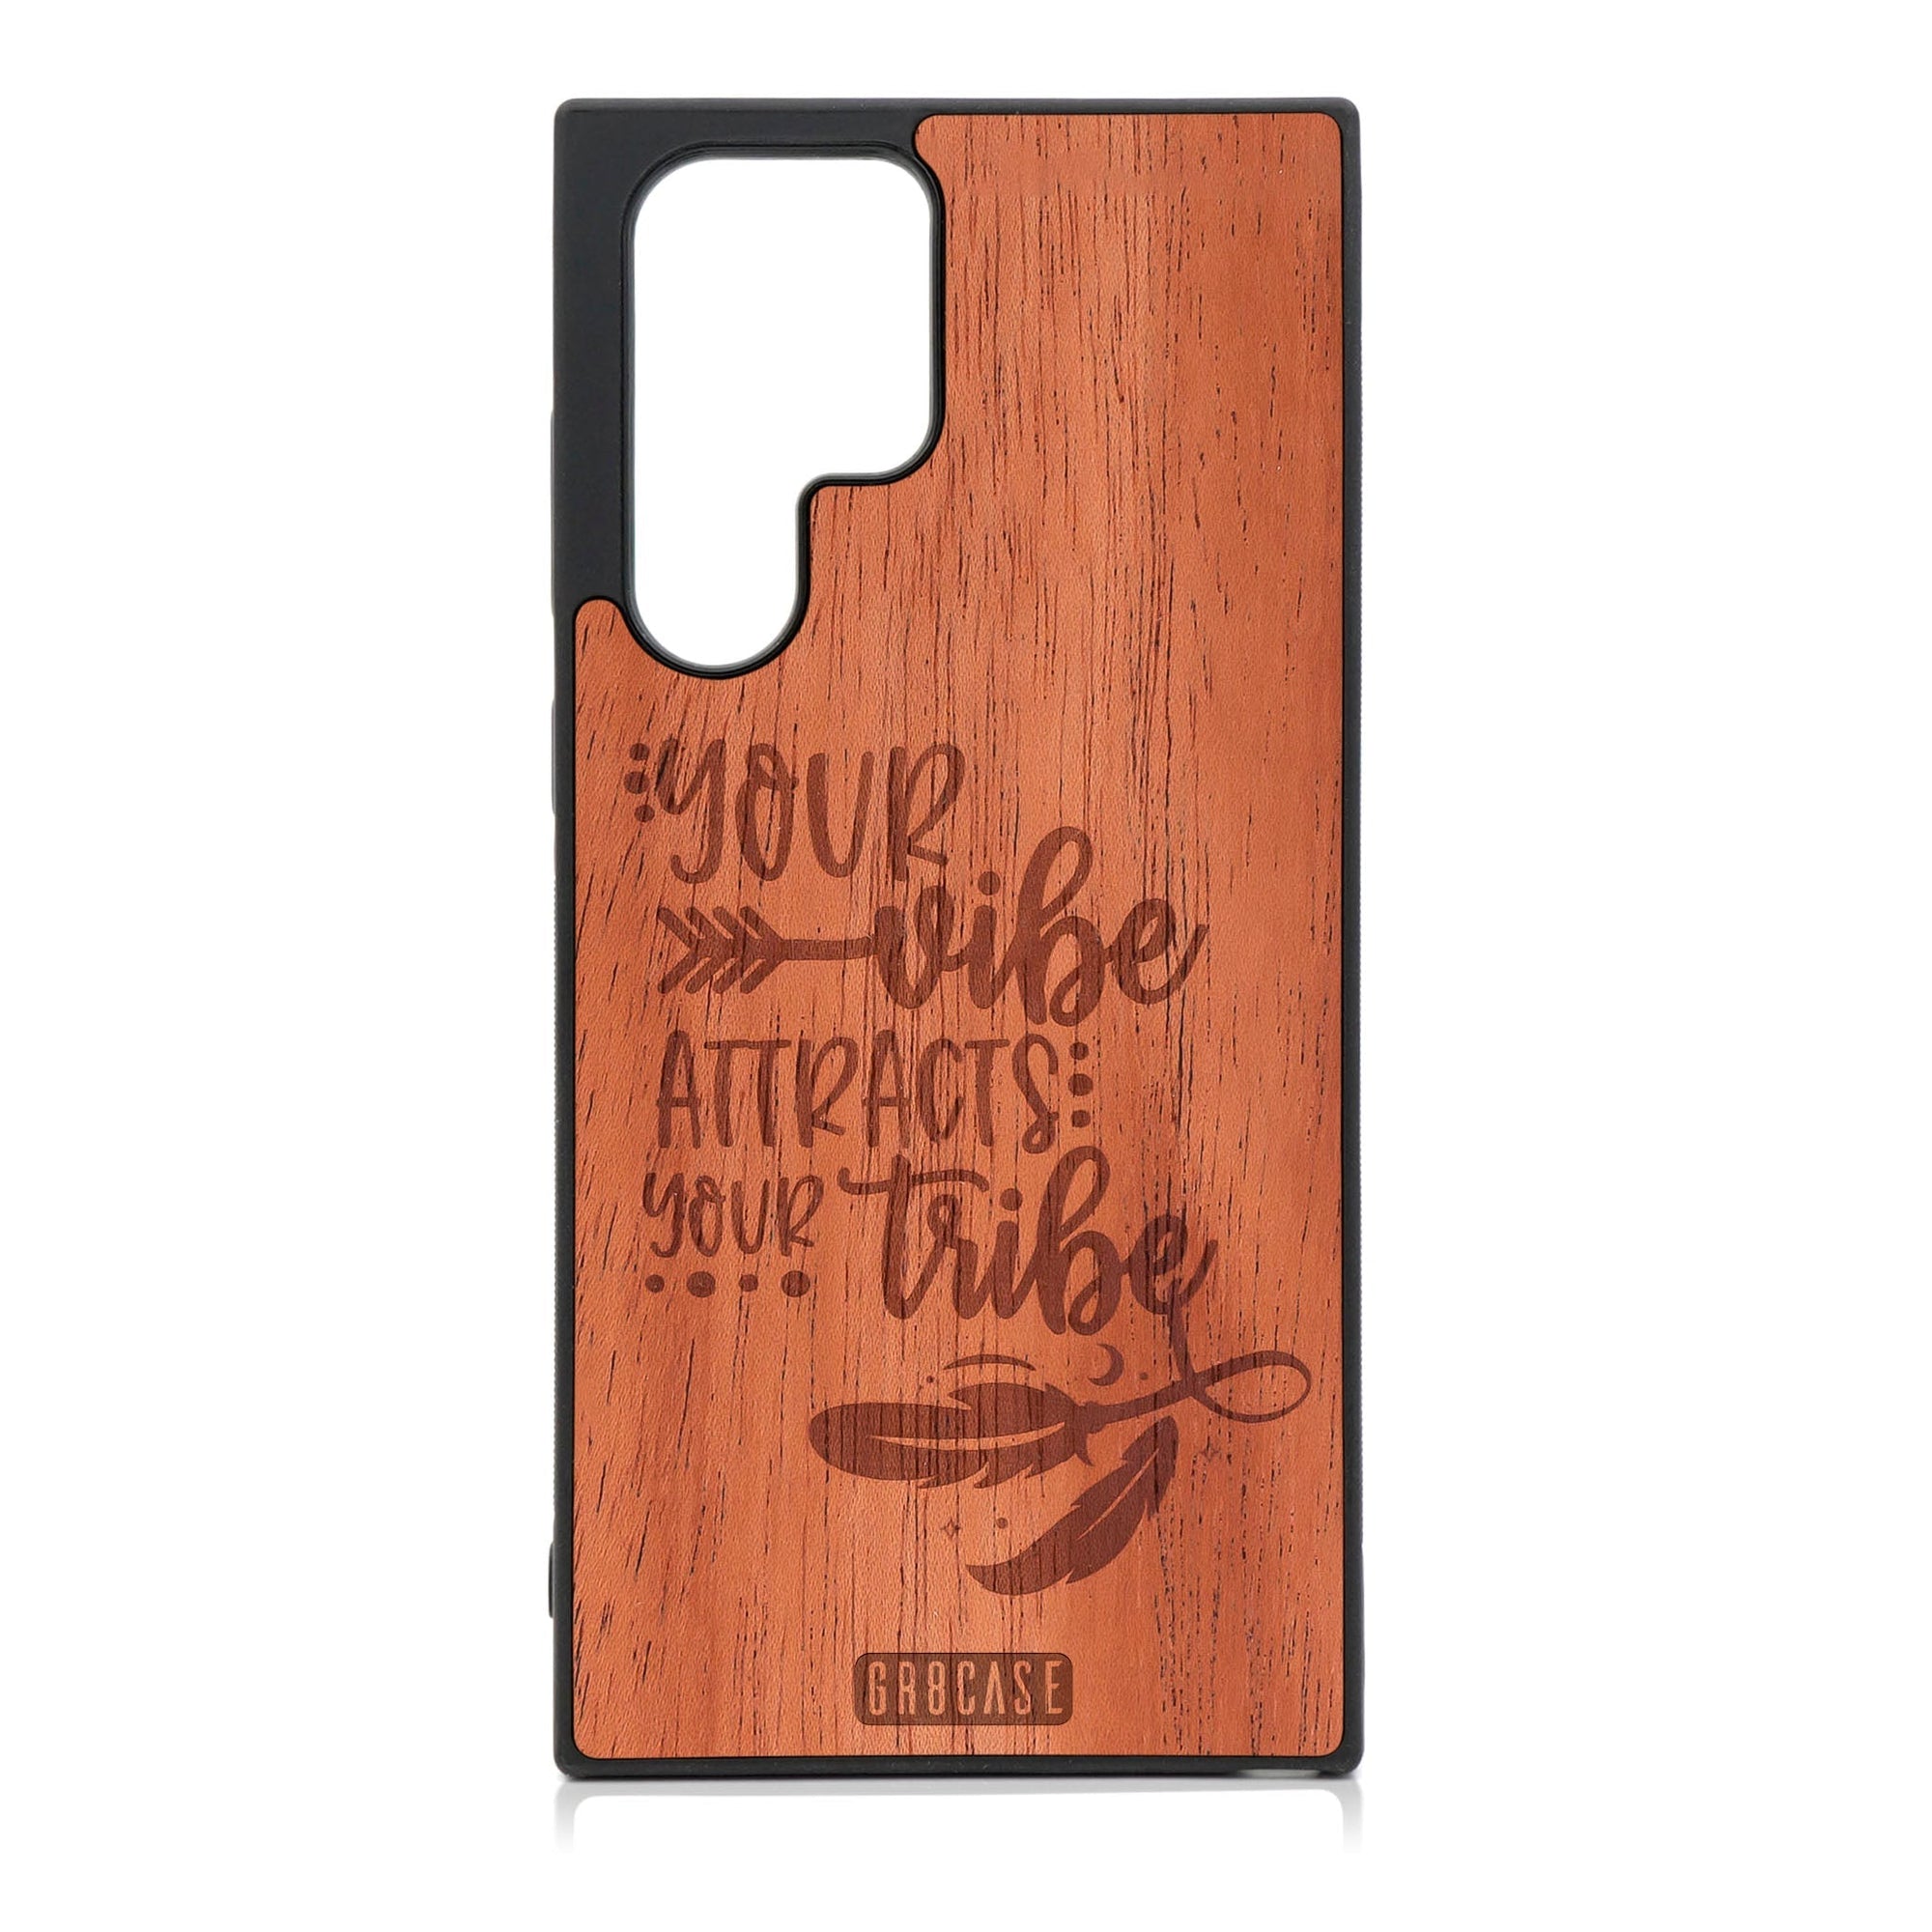 Your Vibe Attracts Your Tribe Design Wood Phone Case For Galaxy S24 Ultra